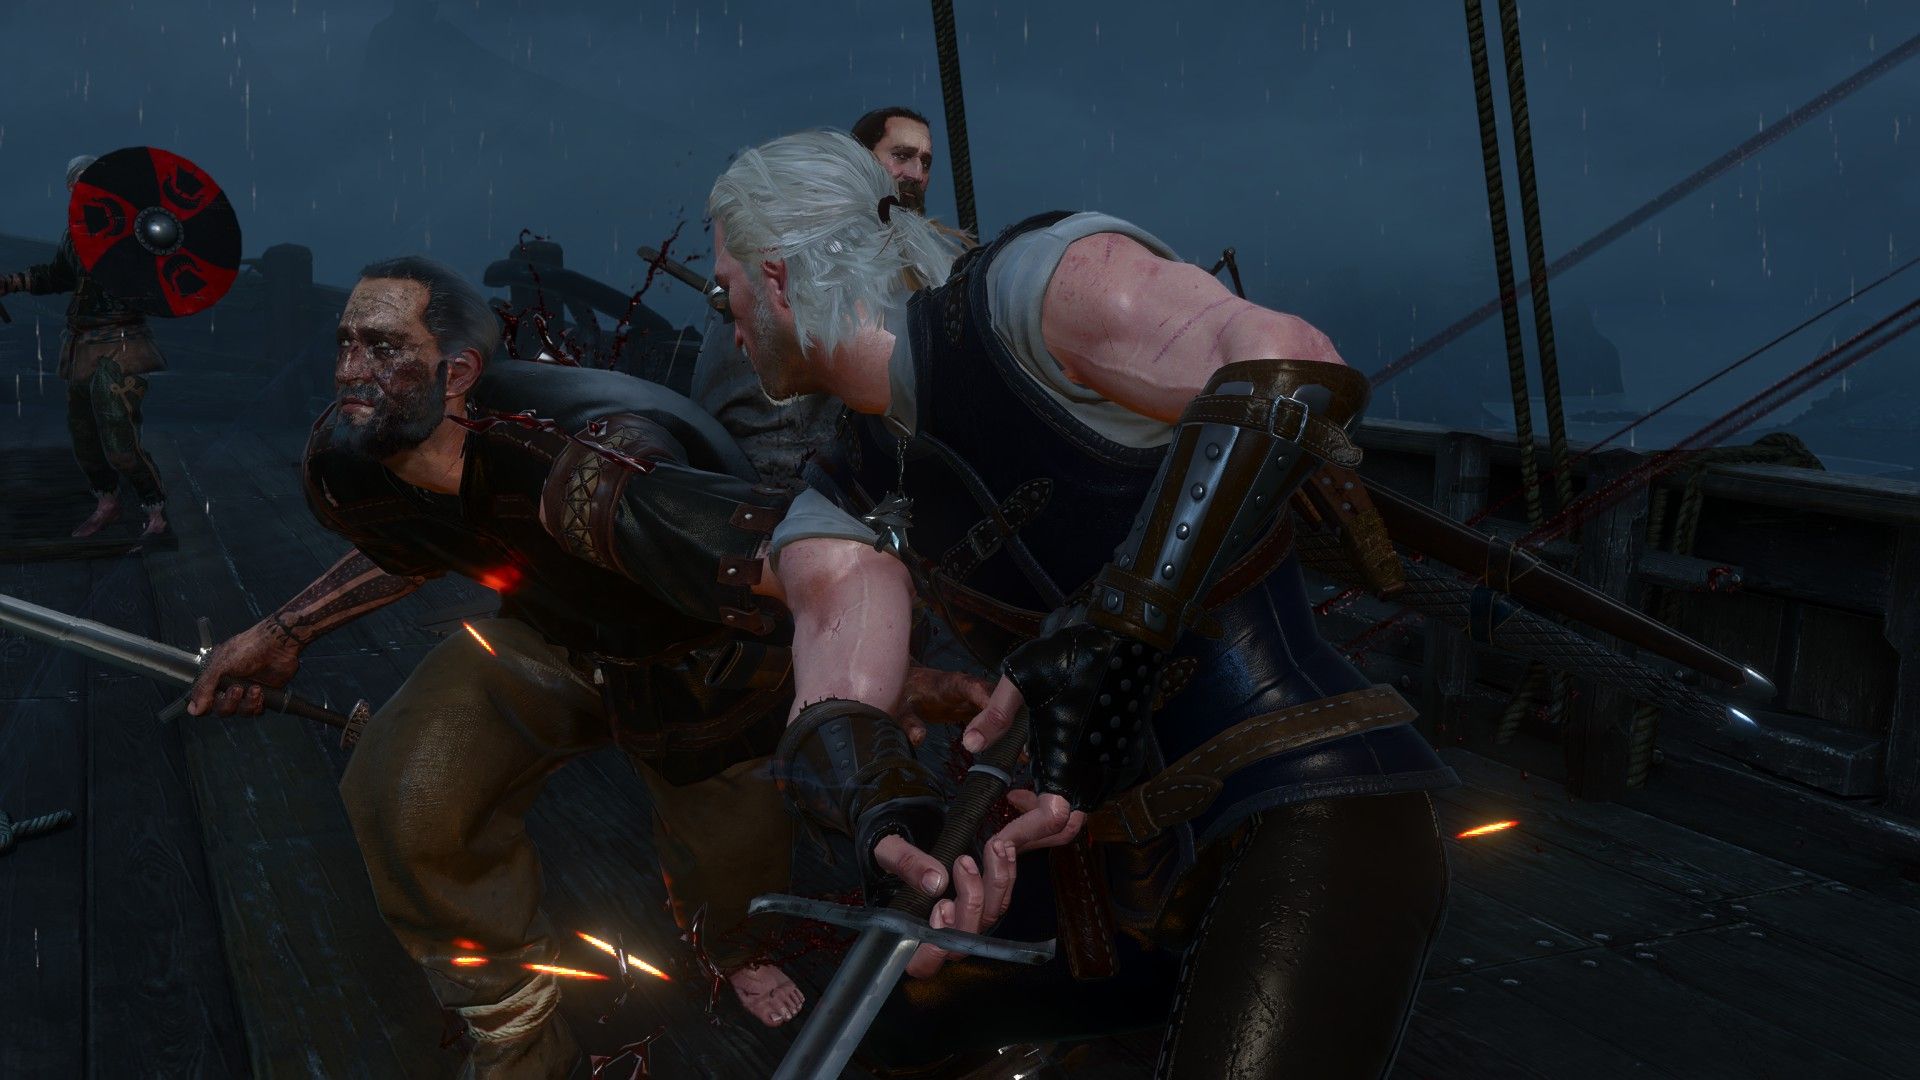 Geralt cuts a pirate with his steel sword on the deck of a ship in the middle of a storm.